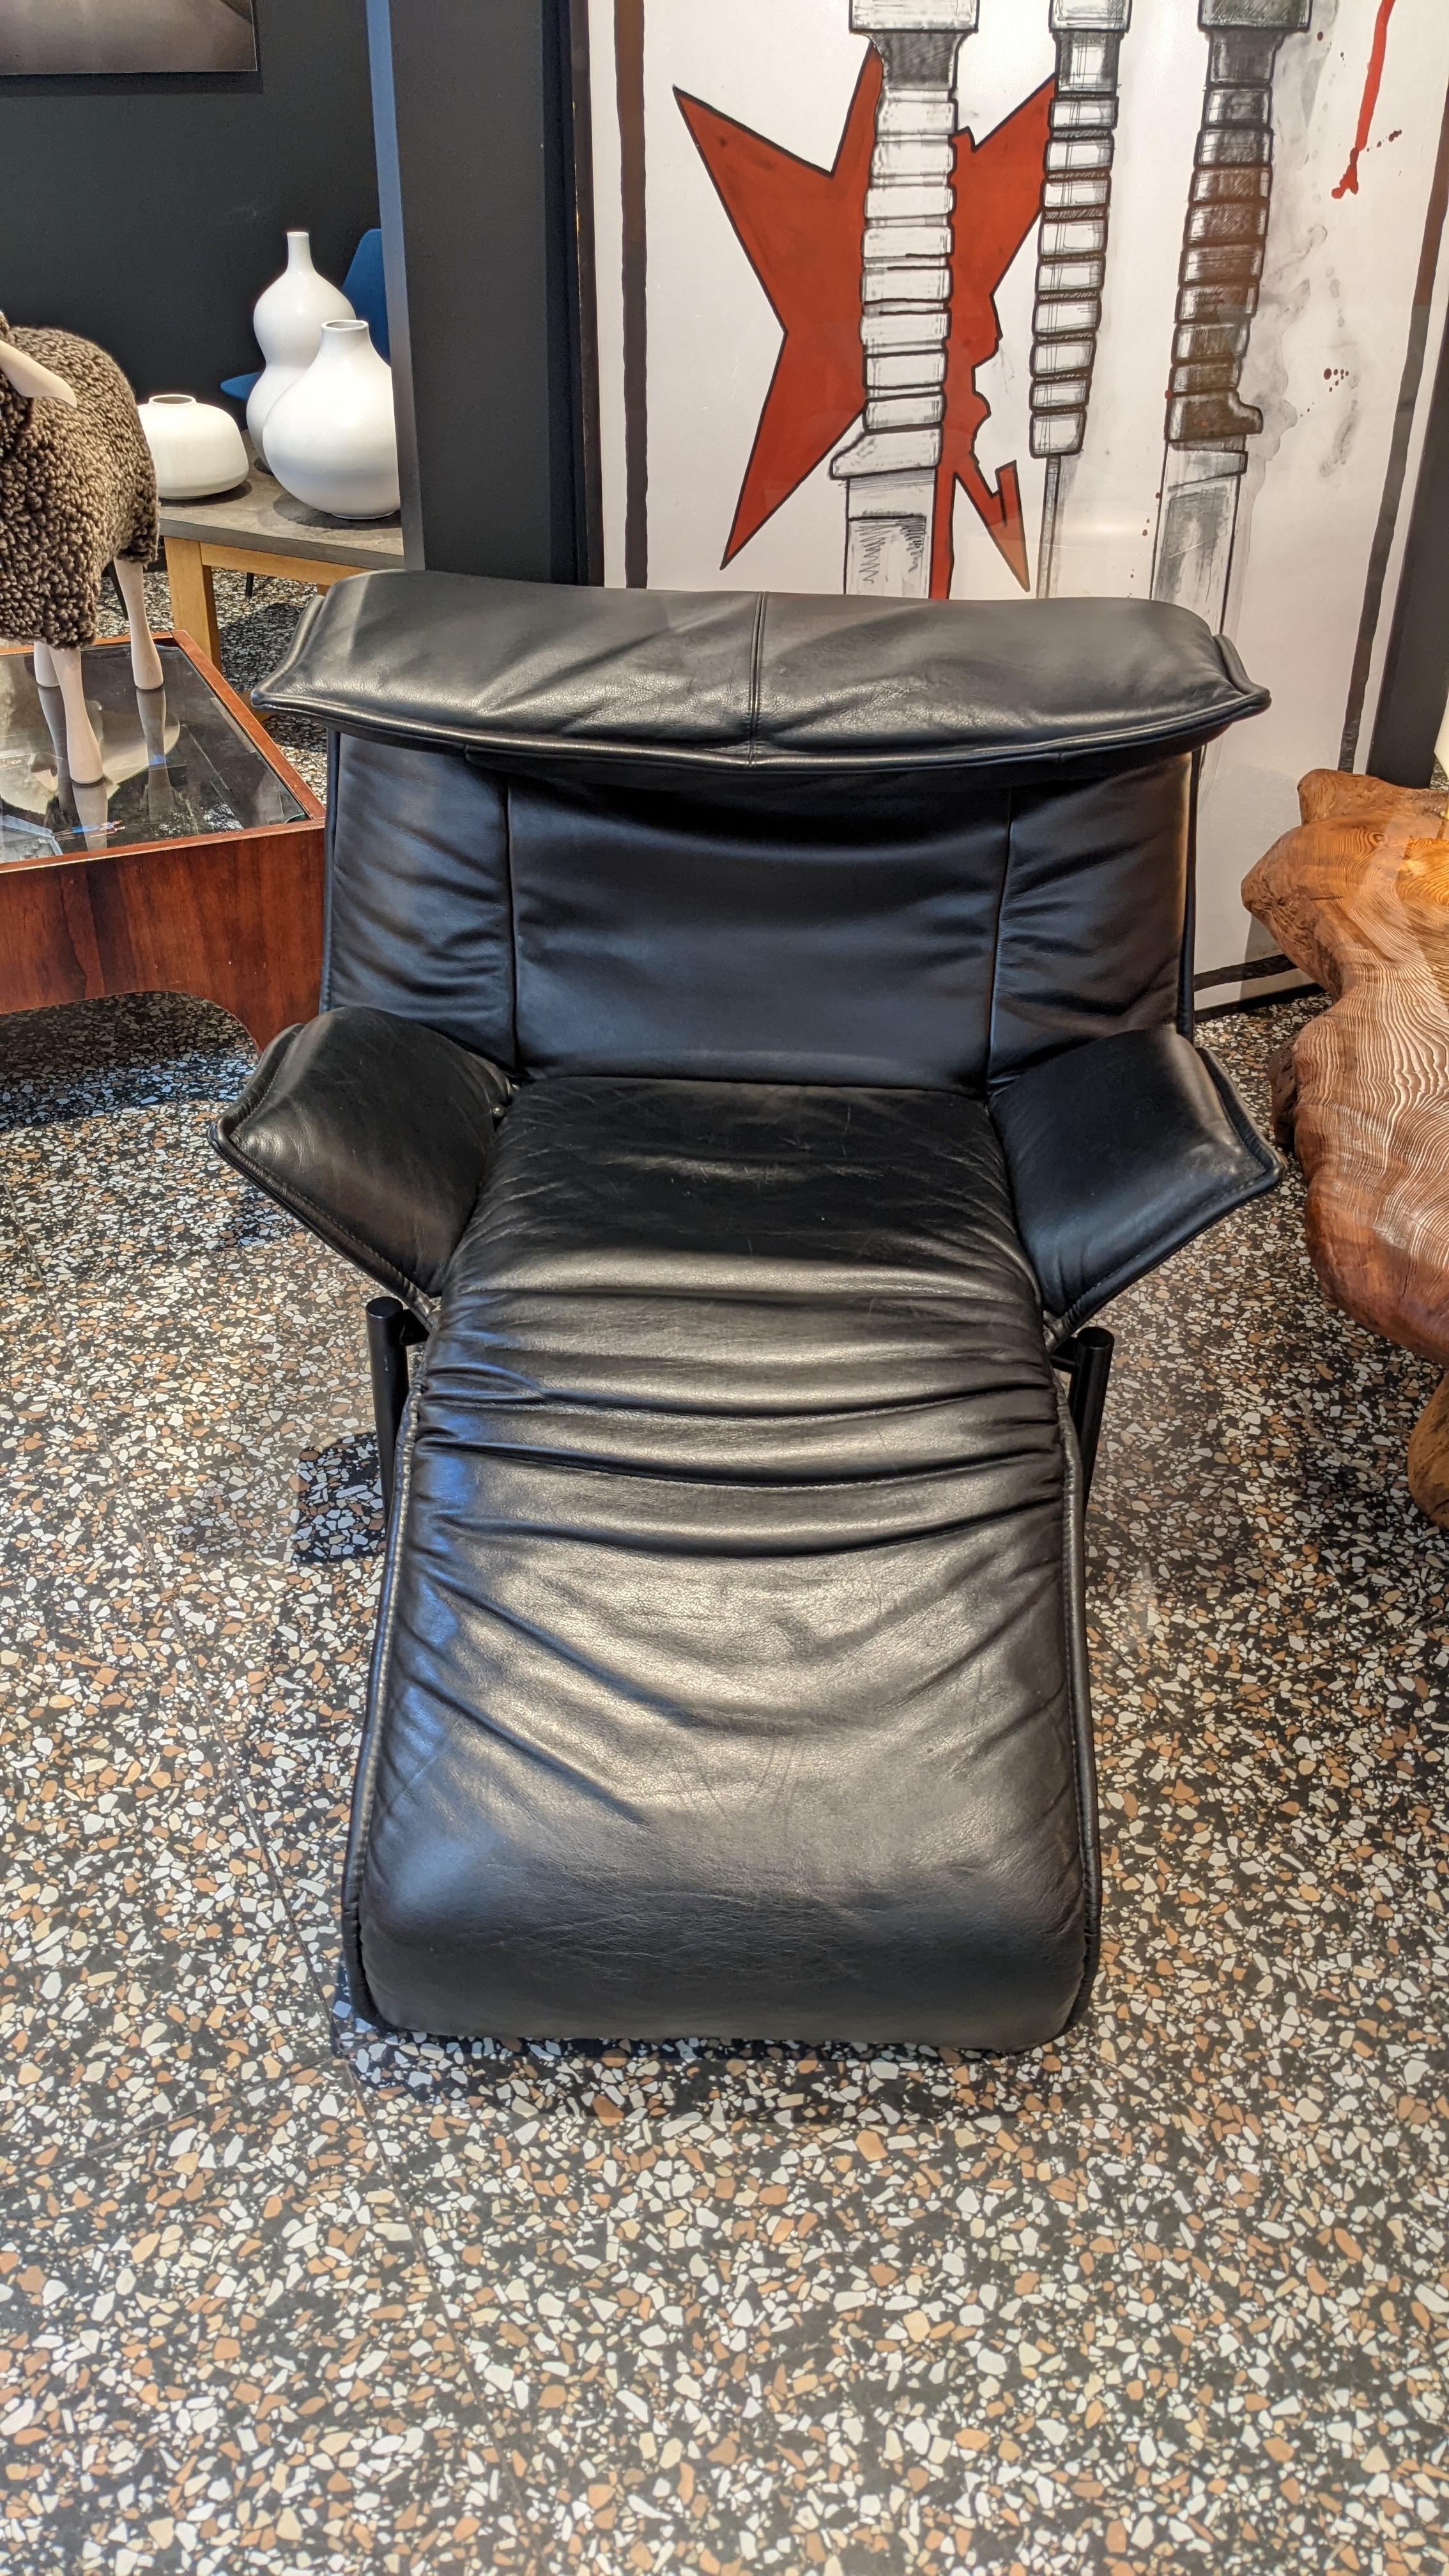 This comfortable lounge chair with the model name ‘Veranda’ was designed by Italian designer Vico Magistretti in 1983. It can be adjusted in different position and invites to relax.

The chair sits on black tubular feet and is upholstered in black